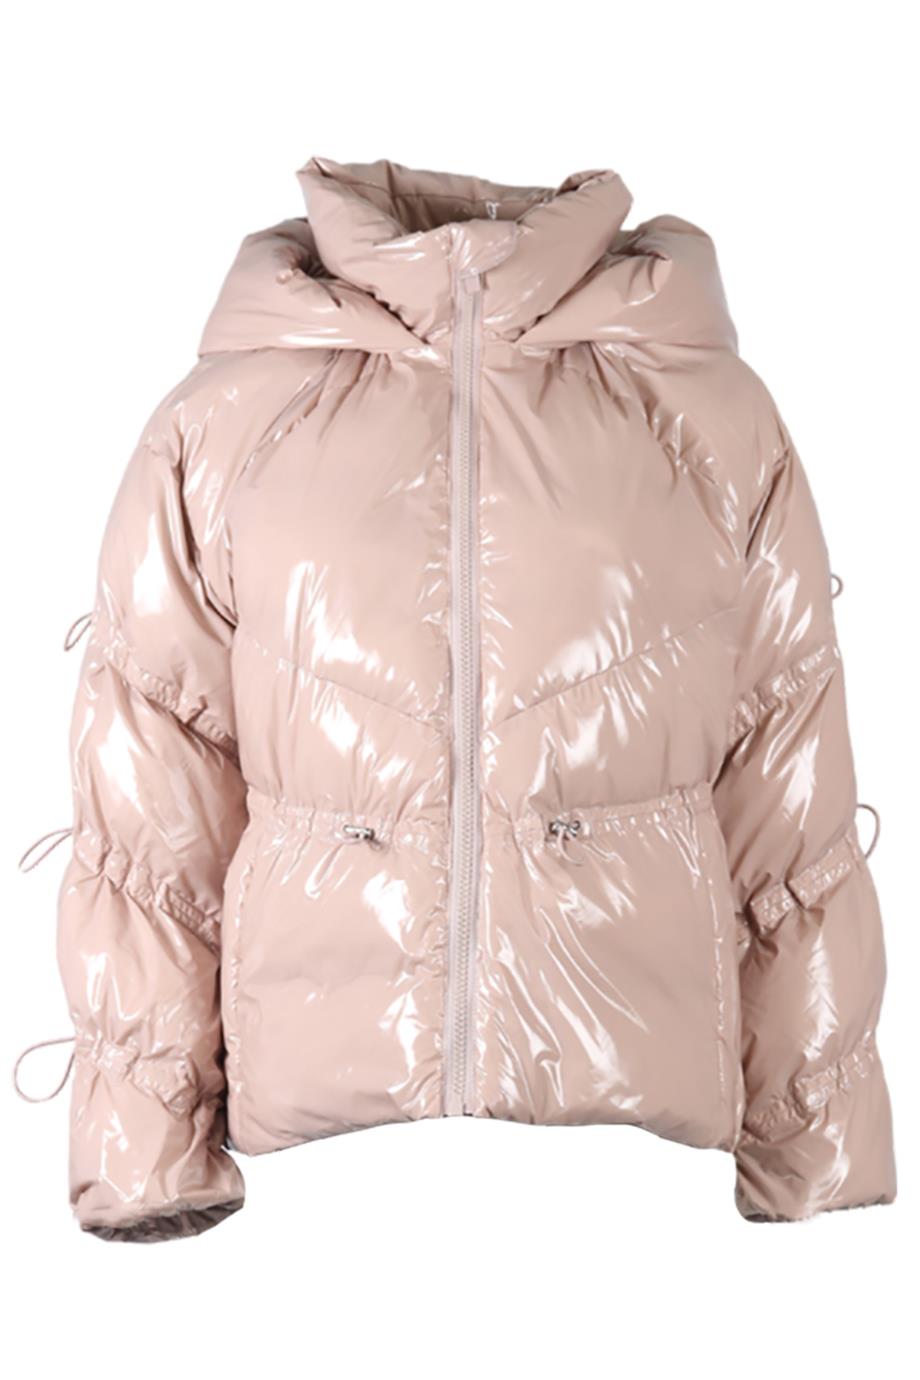 ALO YOGA QUILTED PADDED SHELL JACKET SMALL